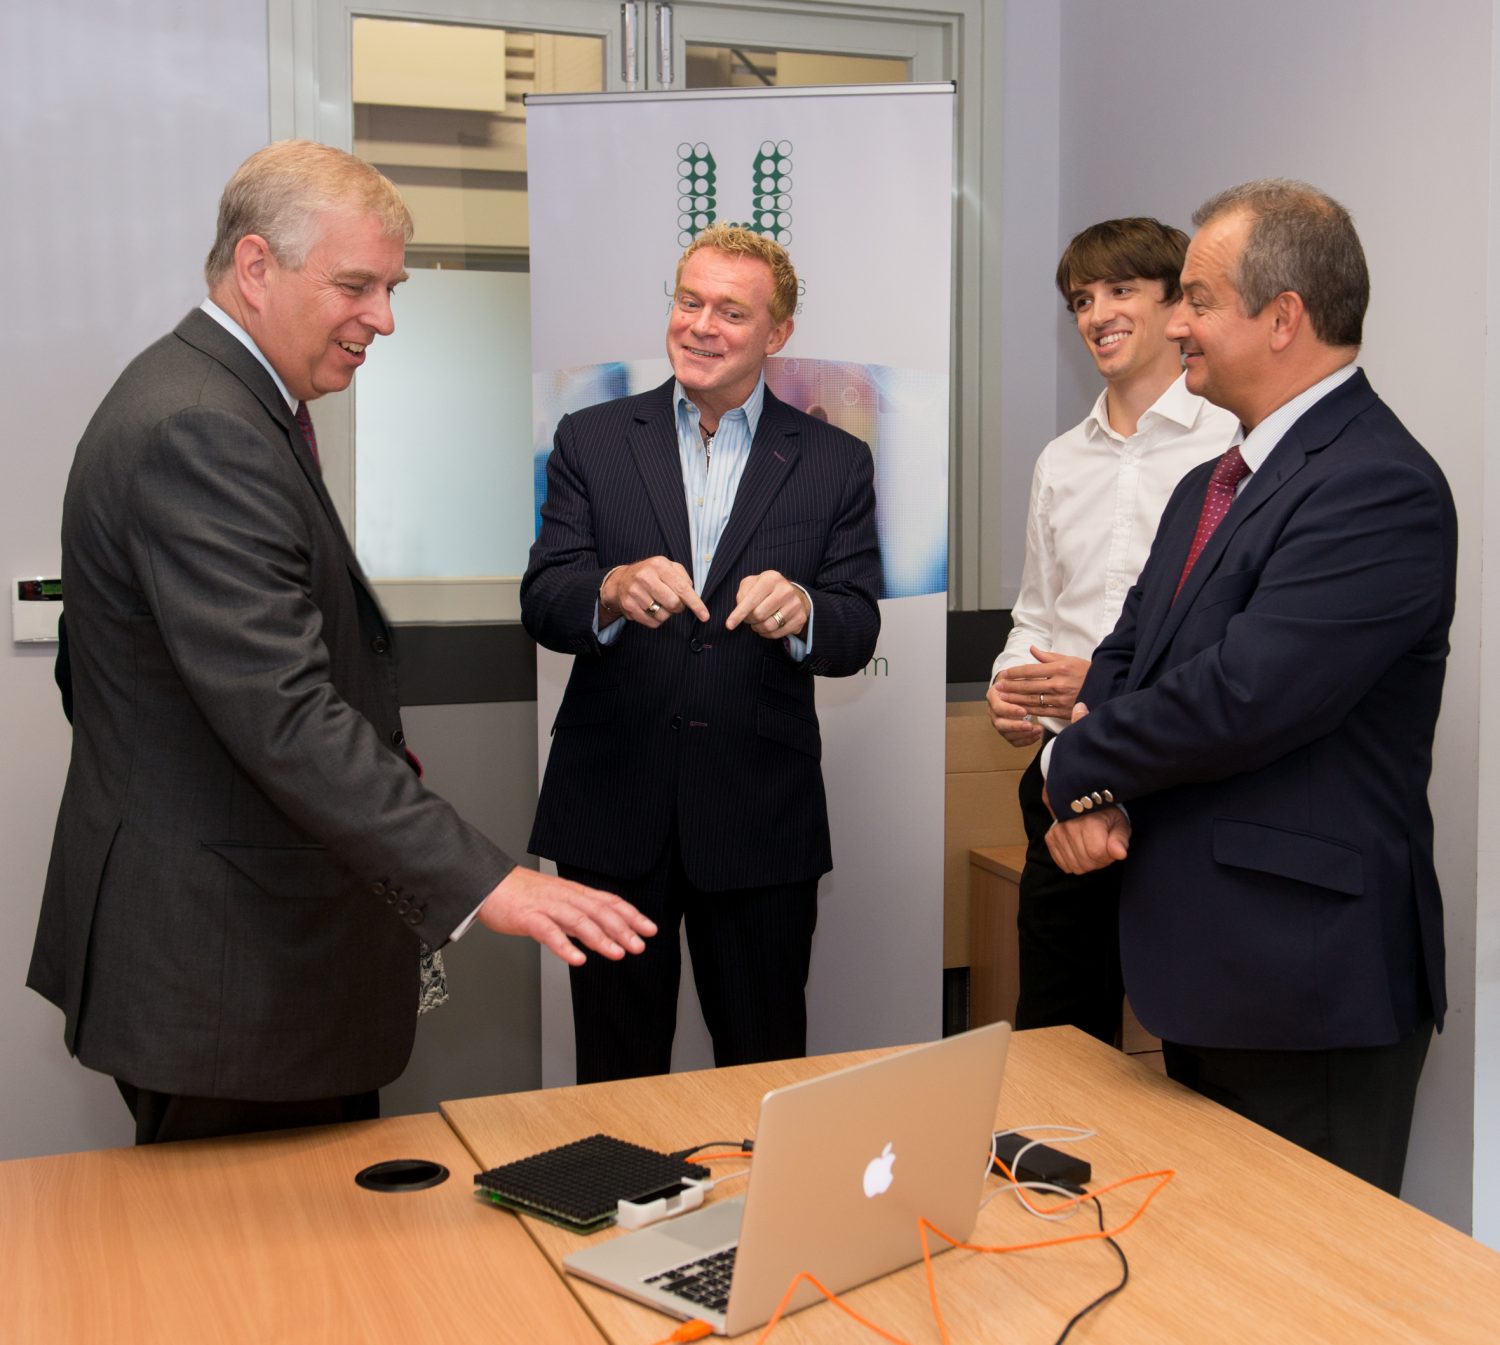 Bristol start-ups win chance to take technology all the way to St James’s Palace